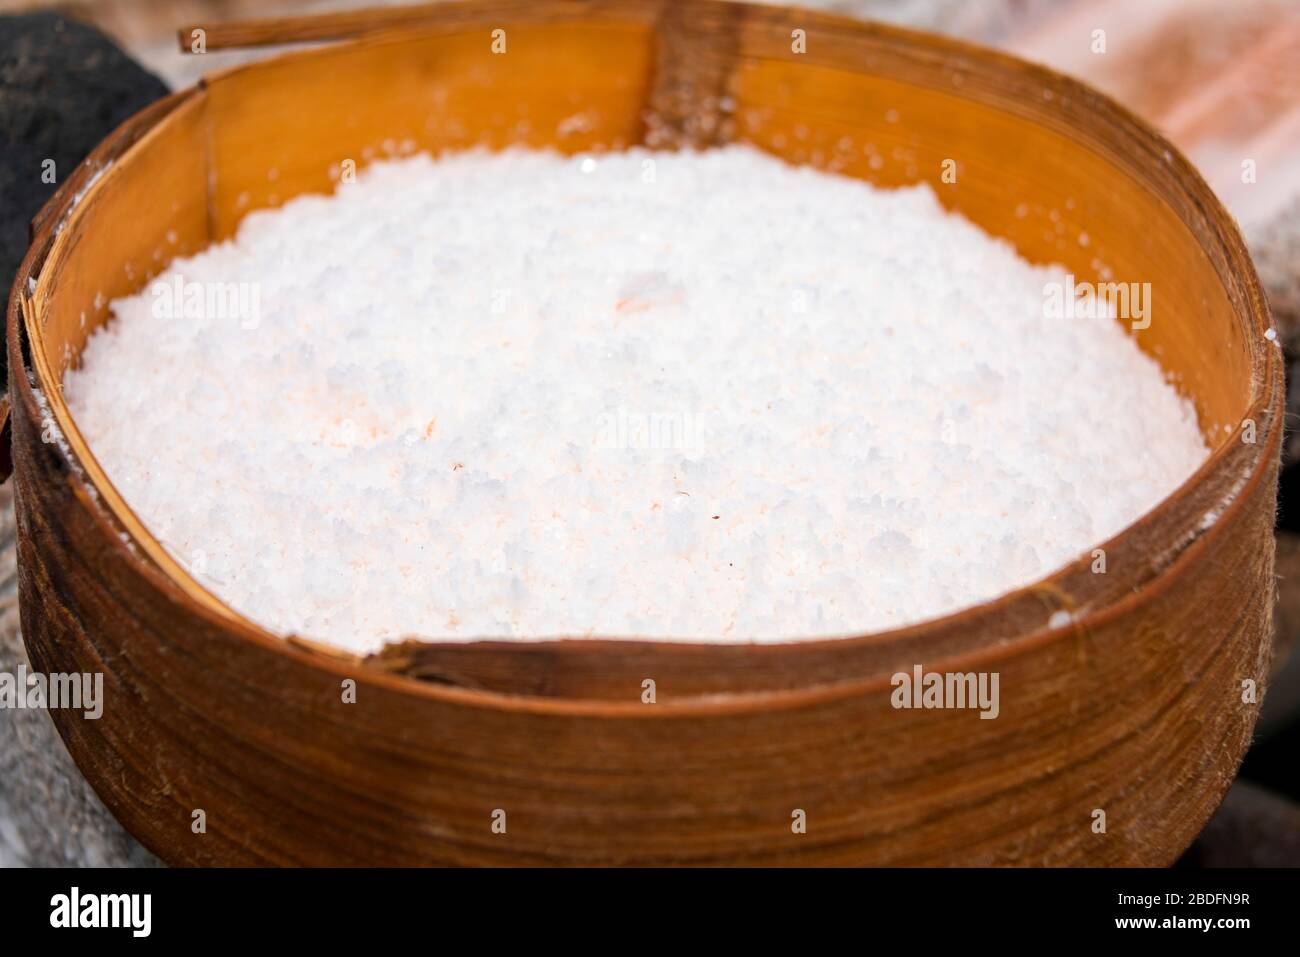 Horizontal close up of a traditional seasalt in Bali, Indonesia. Stock Photo